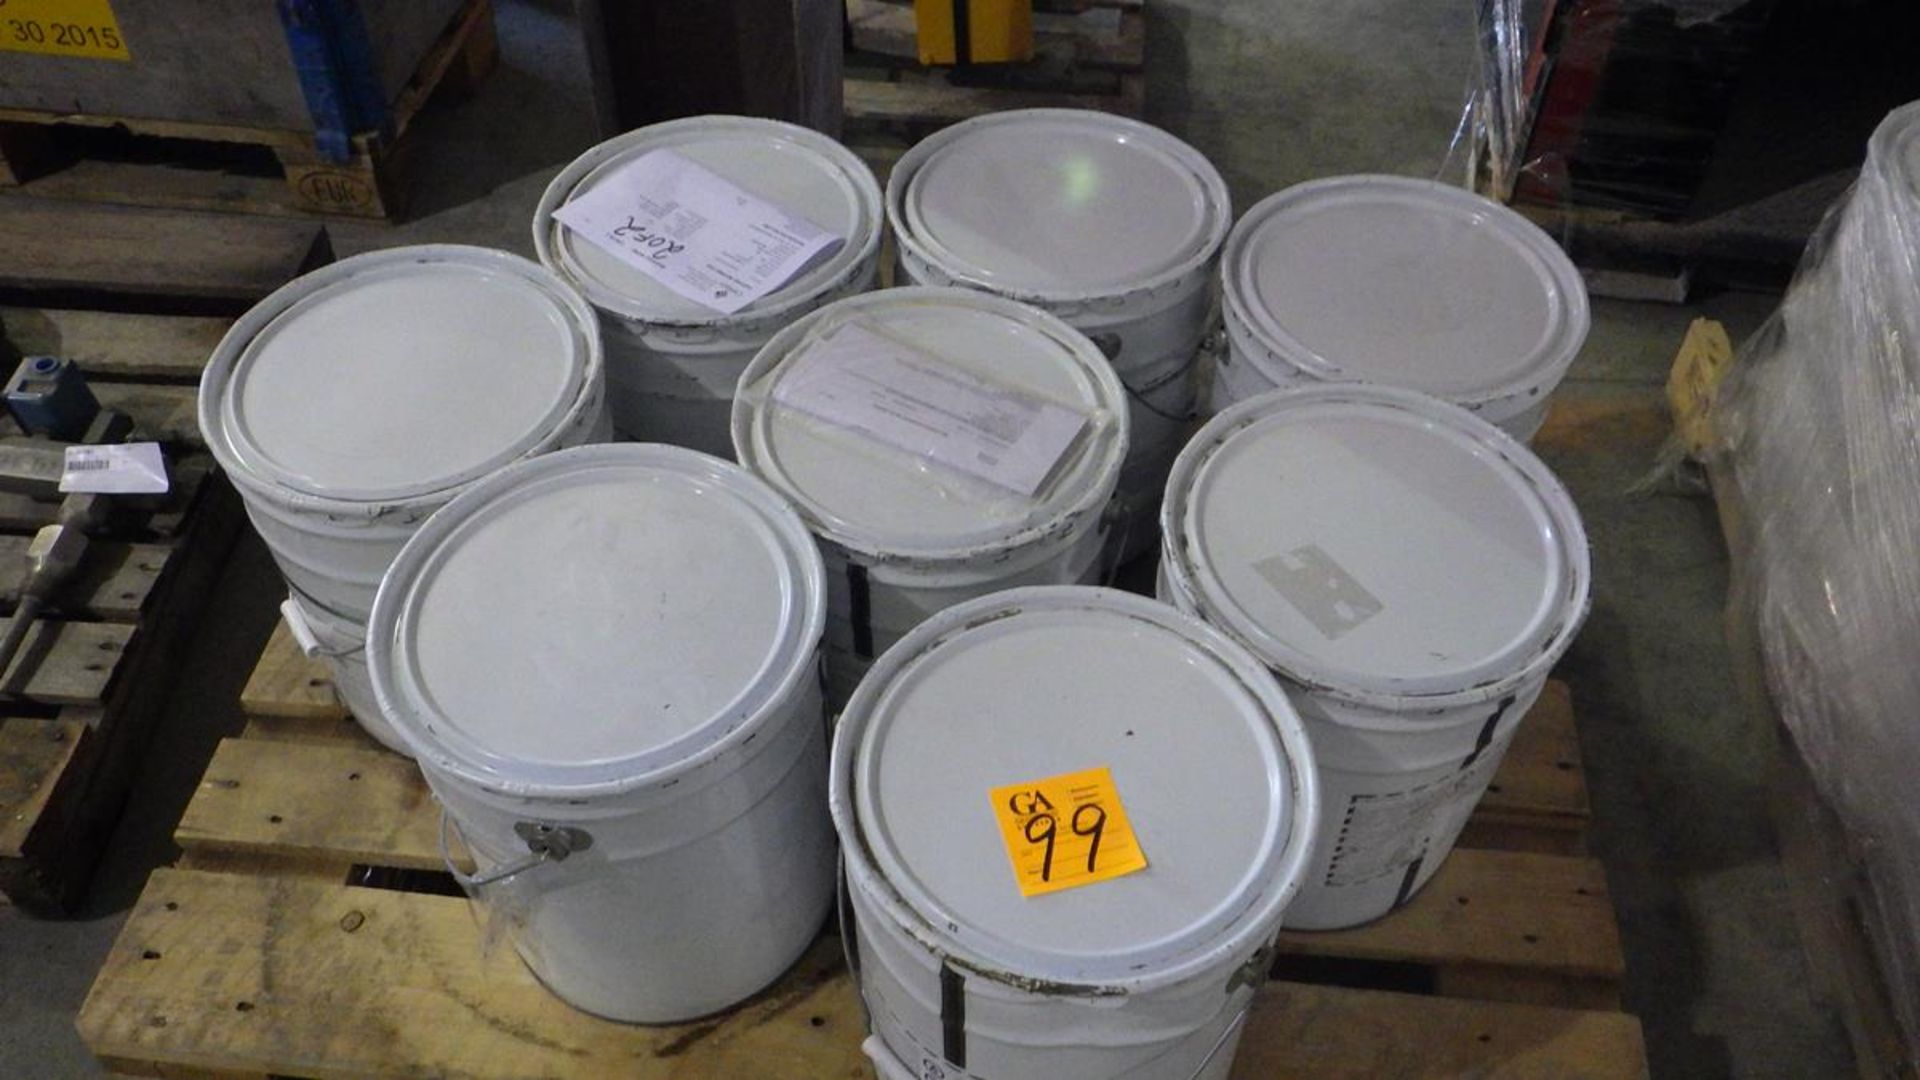 PALLET OF 8 PAILS OF CHILDERS JOINT SEALANT - Image 2 of 3